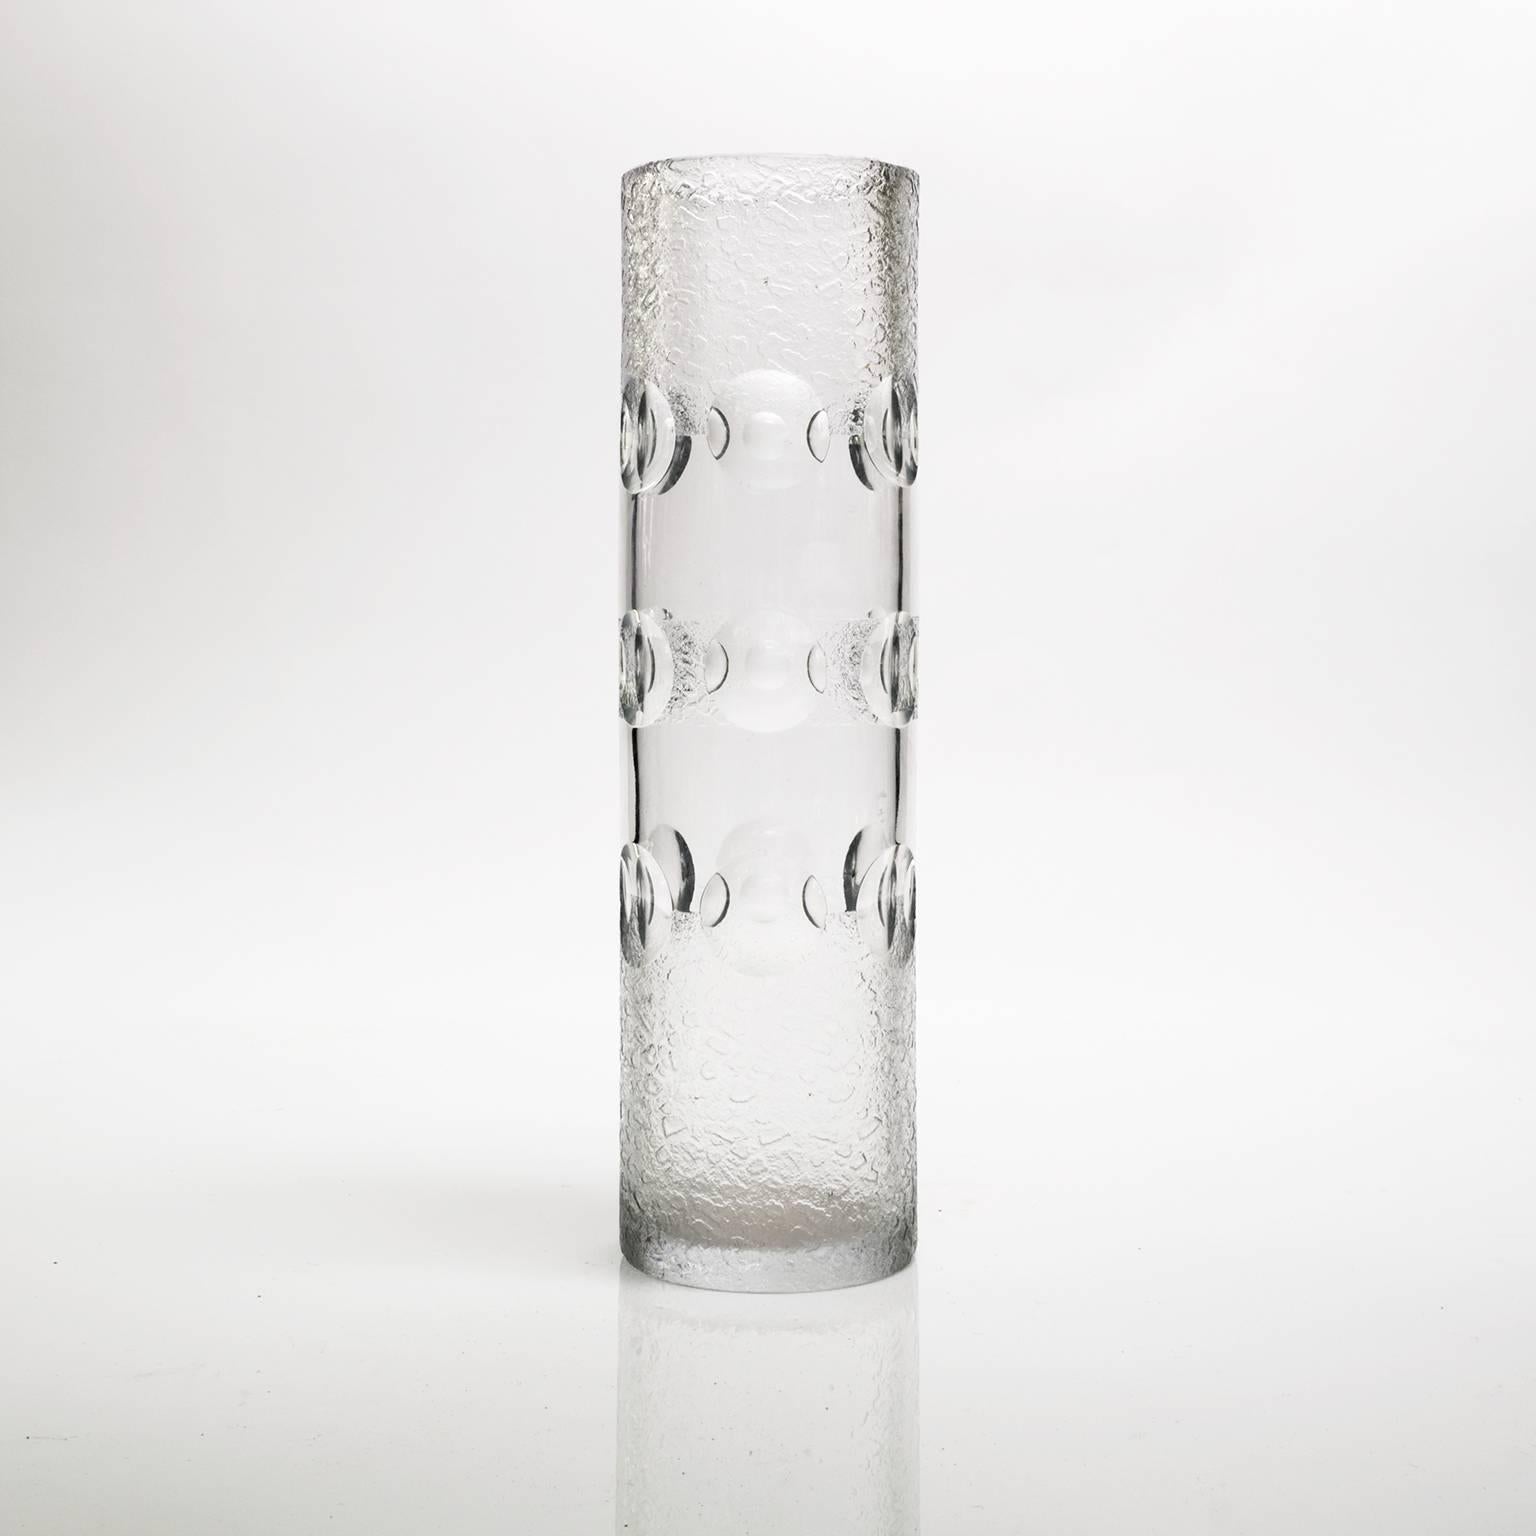 A tall modernist 1970s lead crystal vase with a pattern of concave circles and etched textured bands at the top and bottom.
 
Measures: Height 14.25